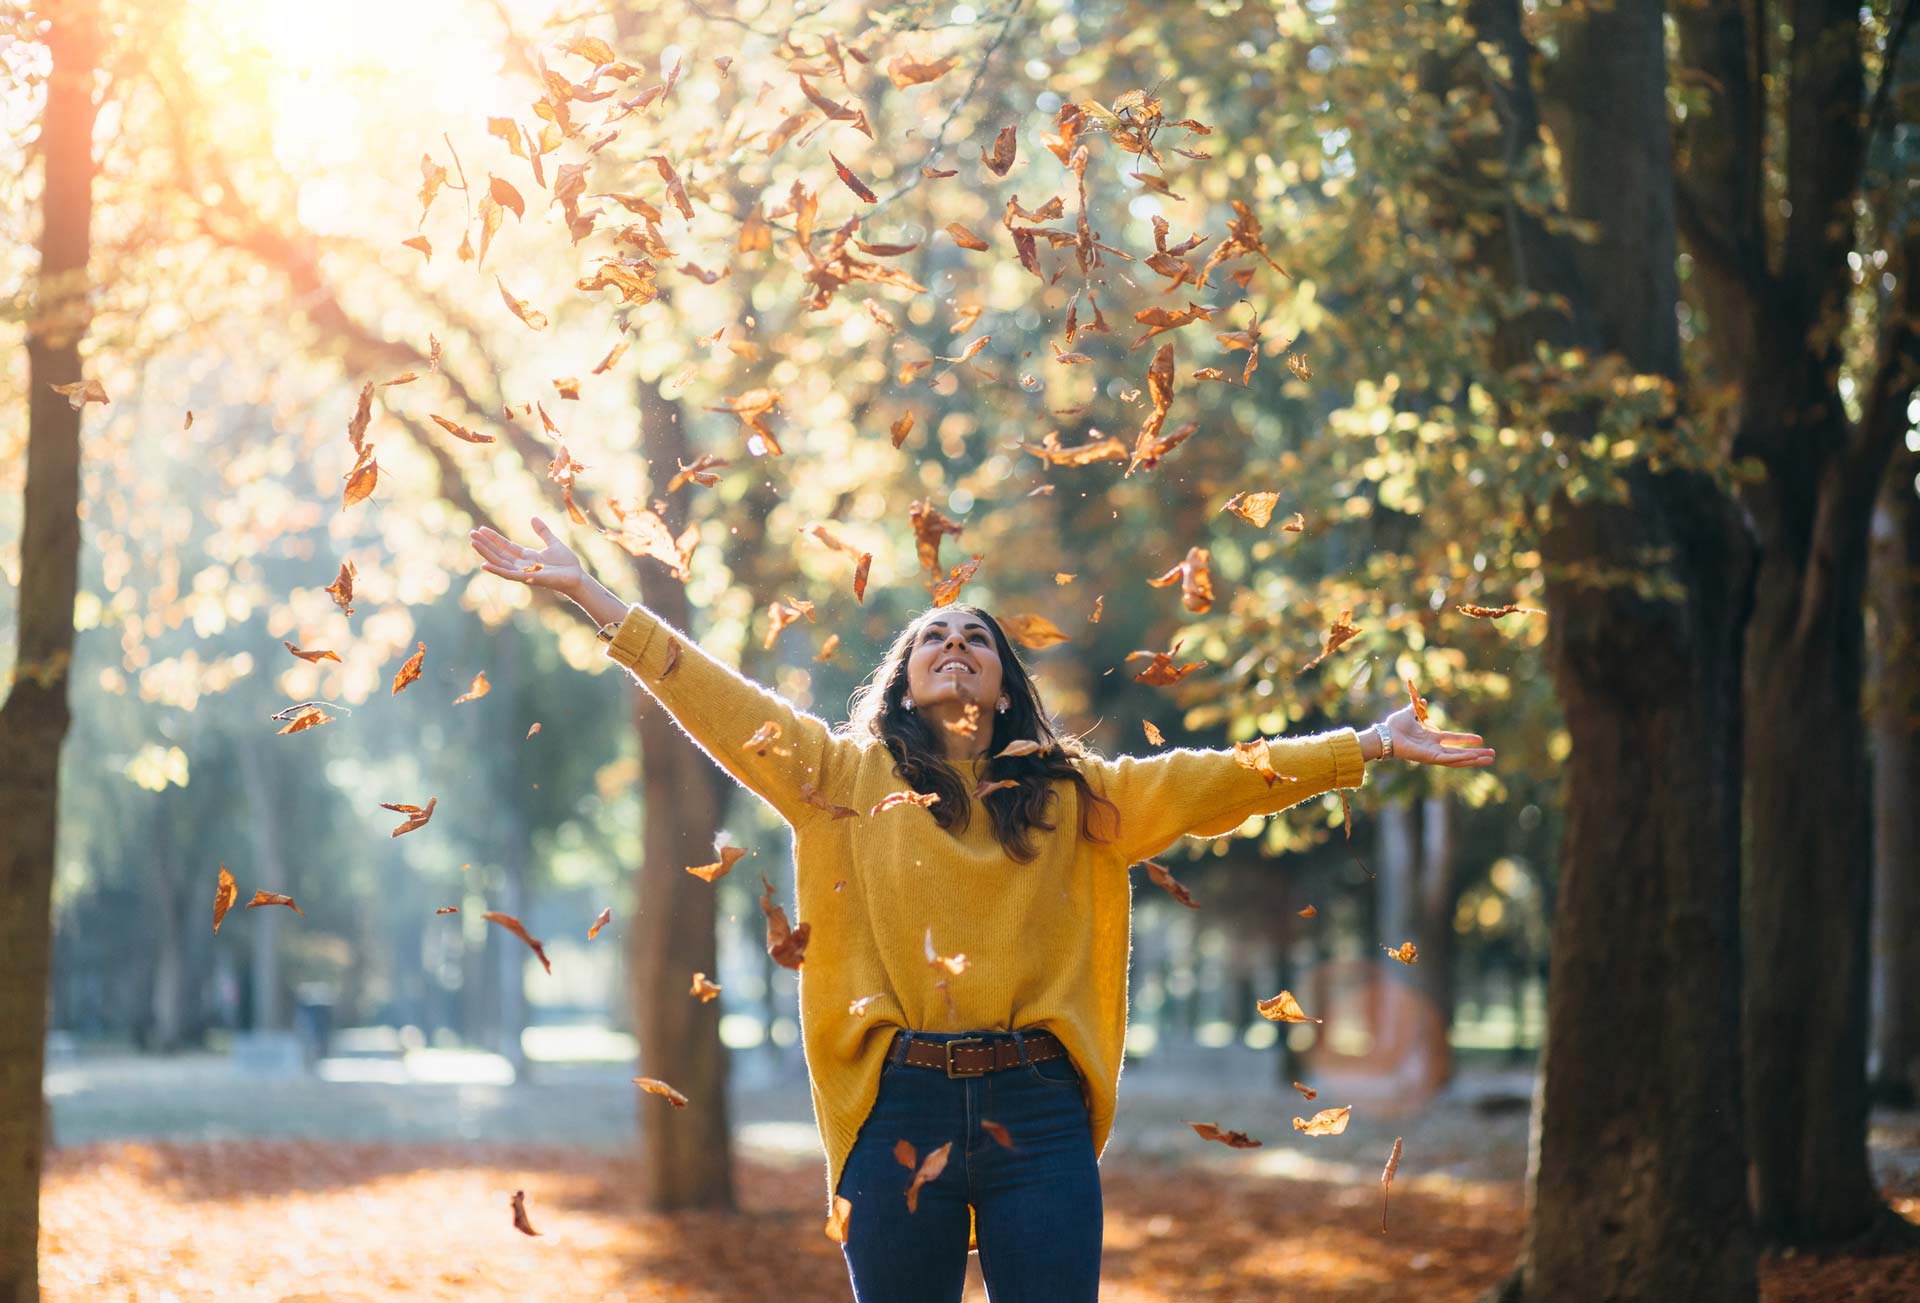 (Fall)ing into a Healthy Lifestyle: Health and Fitness Tips for Autumn